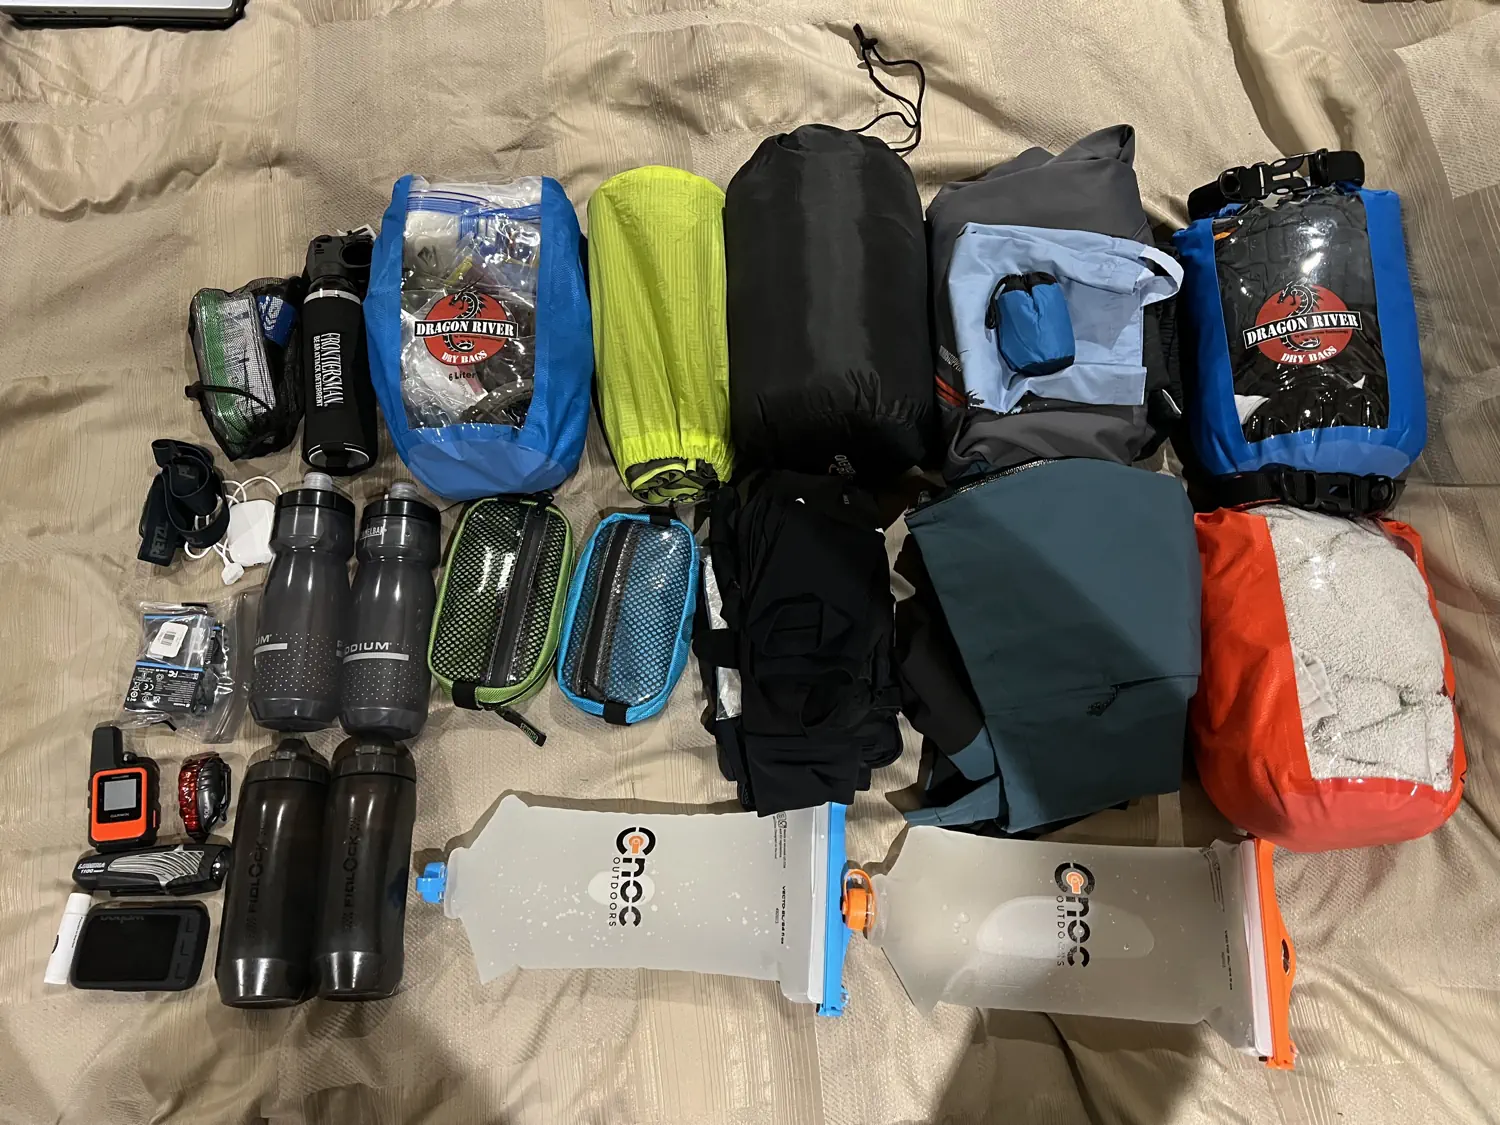 Keith has been packing and re-packing his gear for the 2024 Tour Divide race